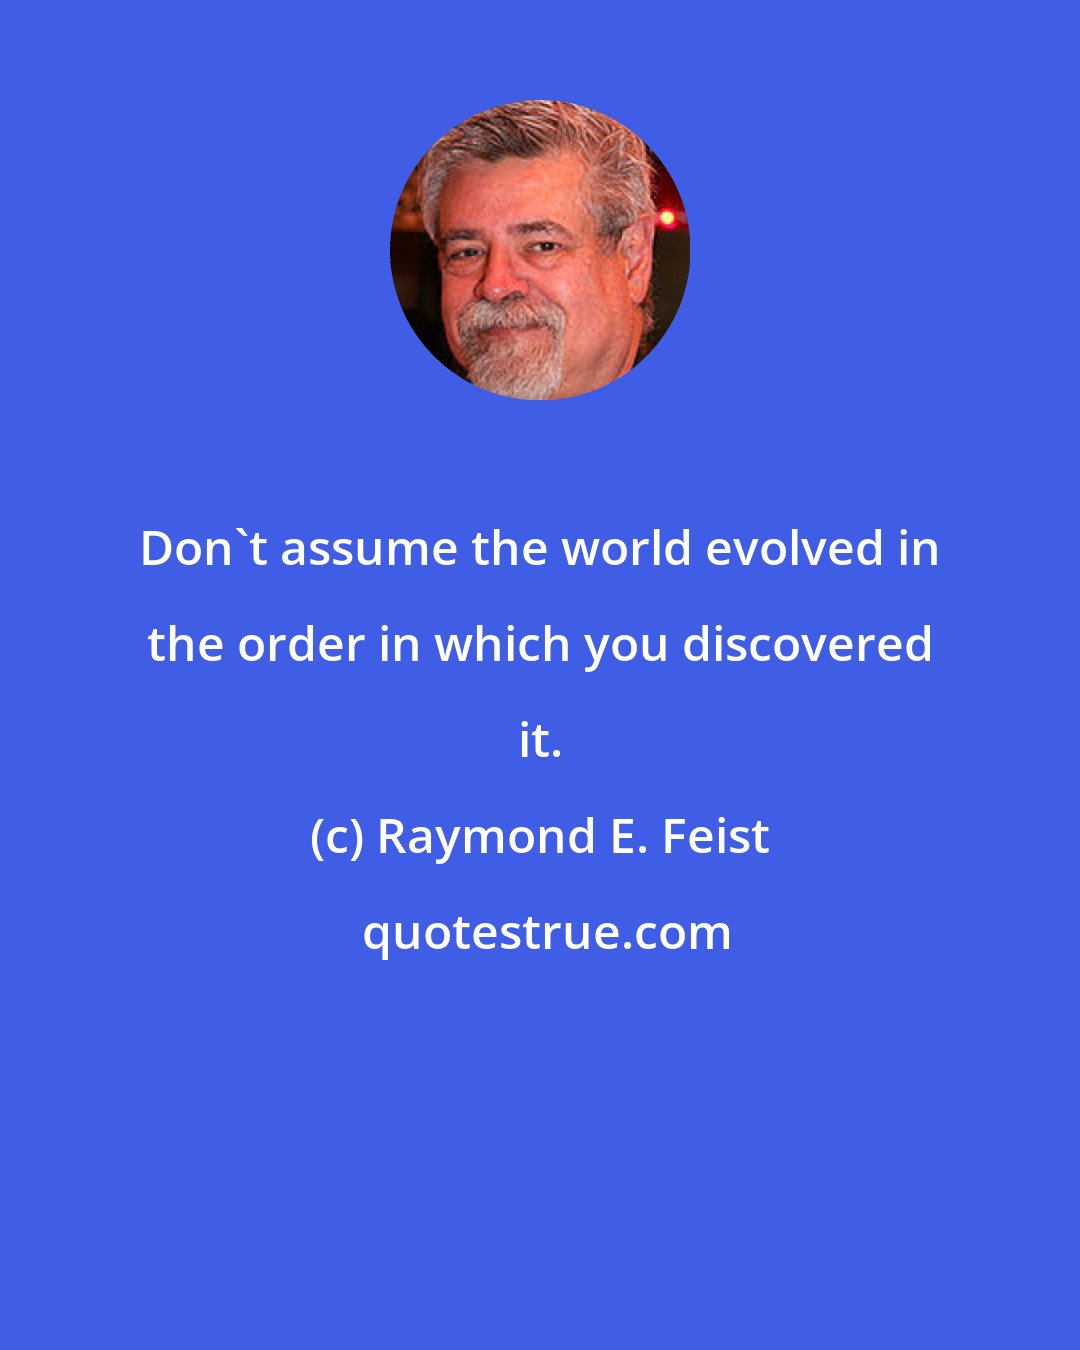 Raymond E. Feist: Don't assume the world evolved in the order in which you discovered it.